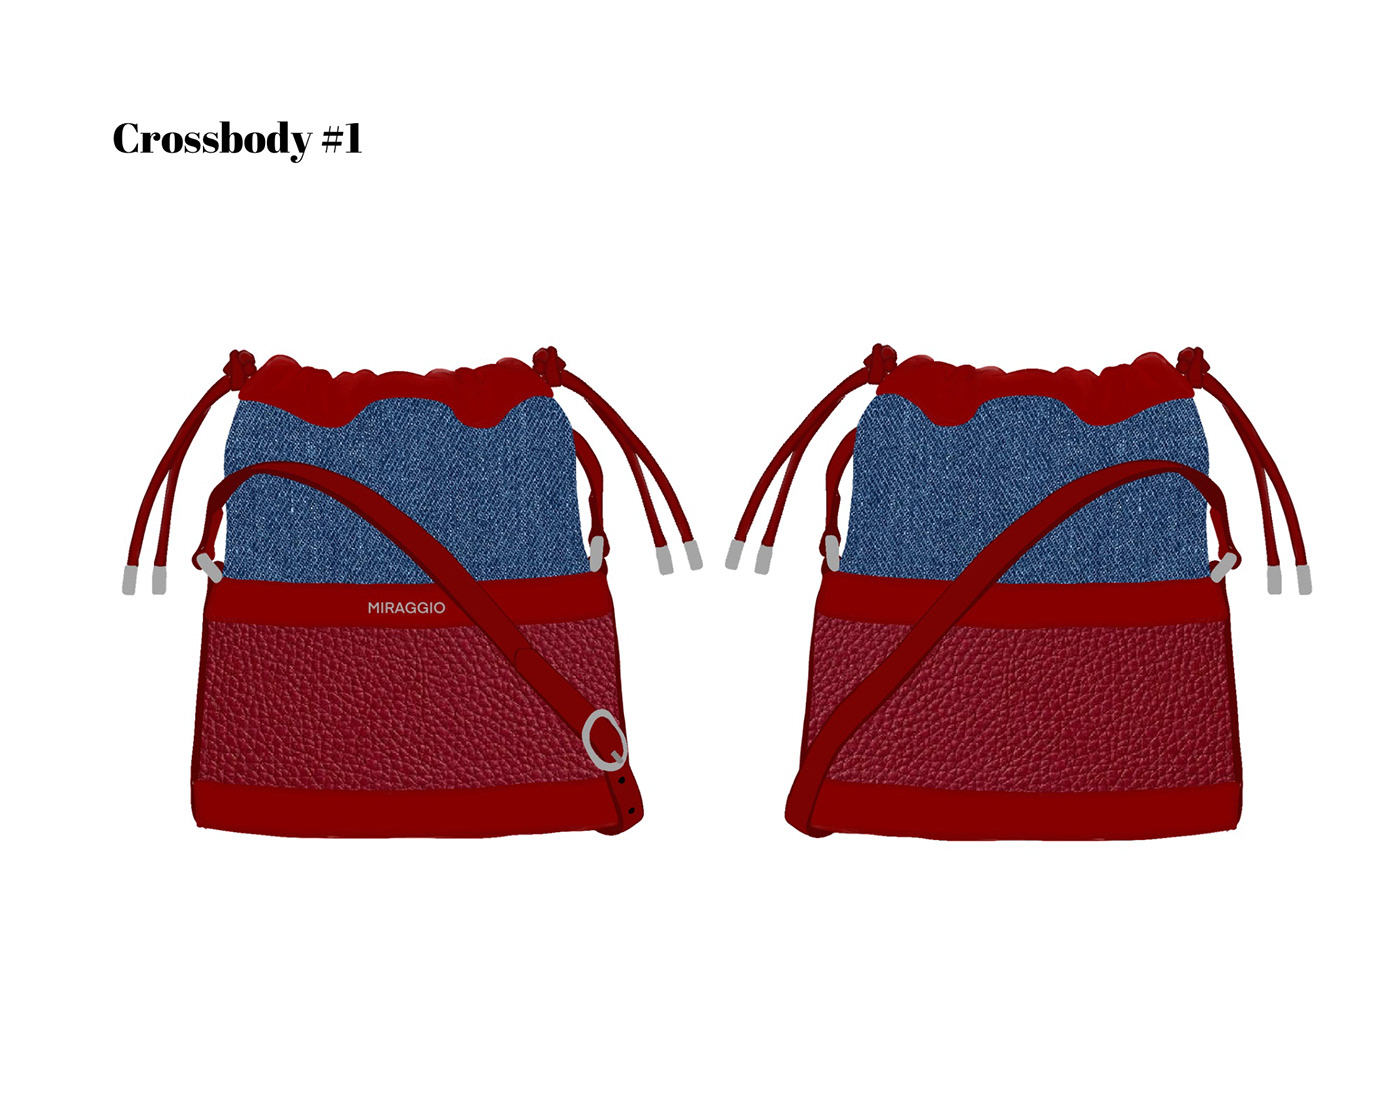 Fashion  design bags Collection ILLUSTRATION  Project cad